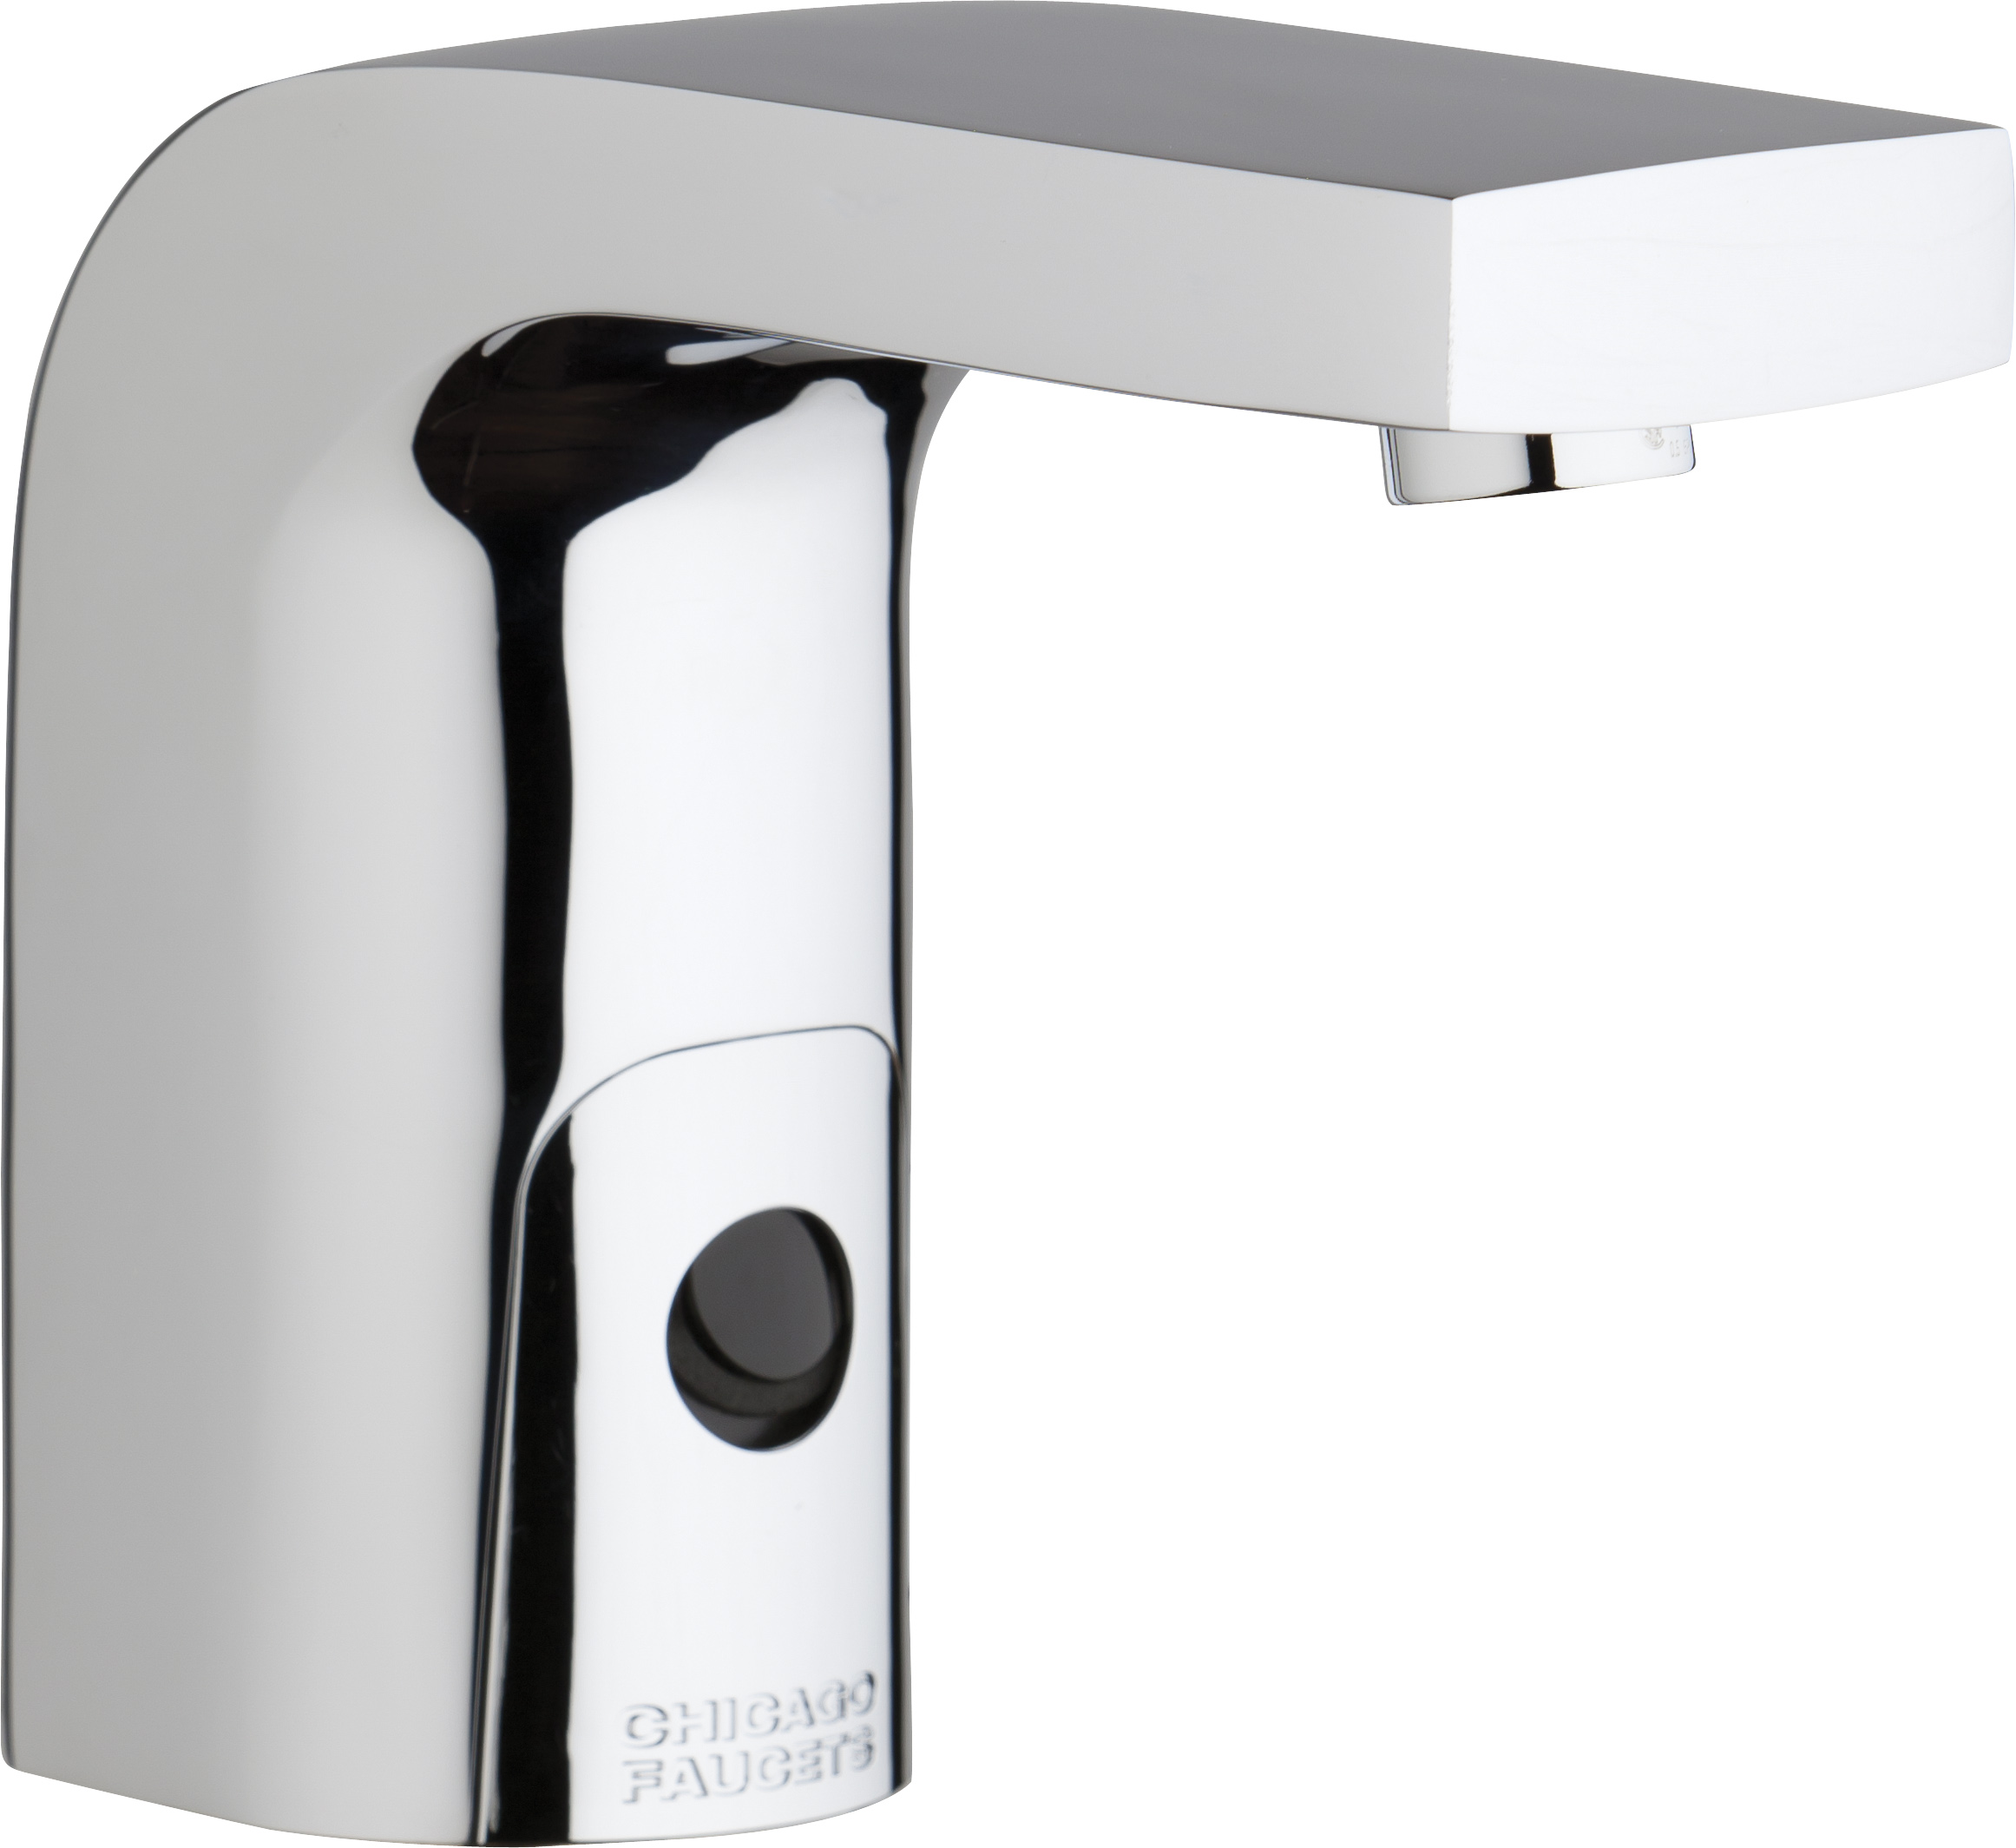 Touch Free Programmable Faucet With Above Deck Electronics